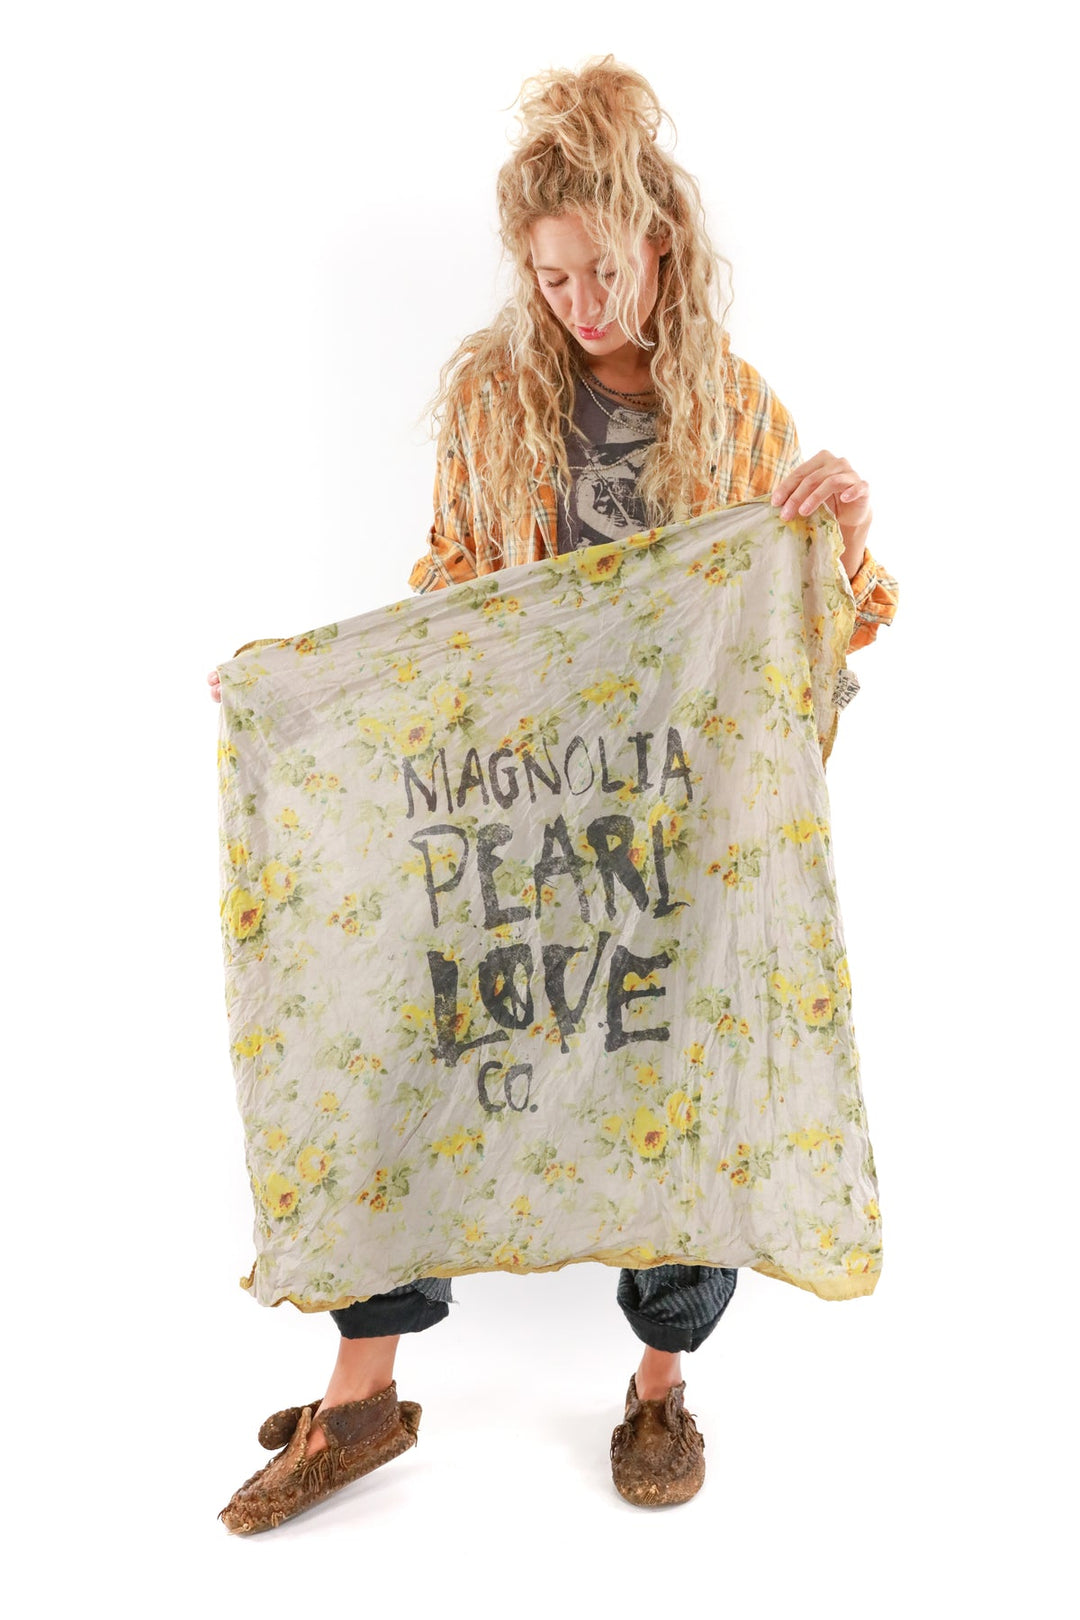 MP LOVE CO FLORAL SCARF-FLORENCE - Kingfisher Road - Online Boutique